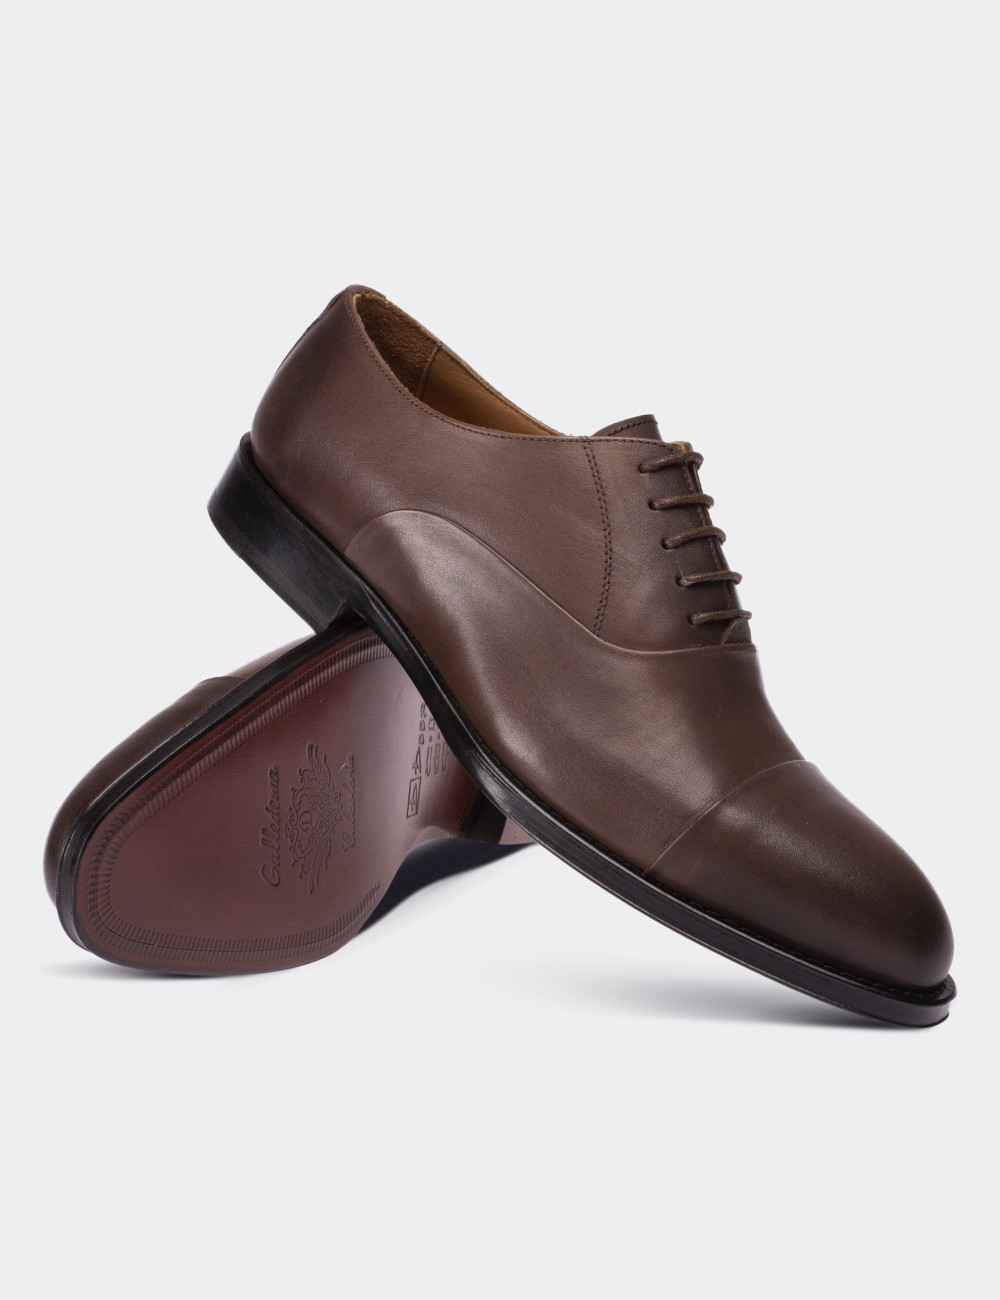 Sandstone  Leather Classic Shoes - 01590MVZNK01